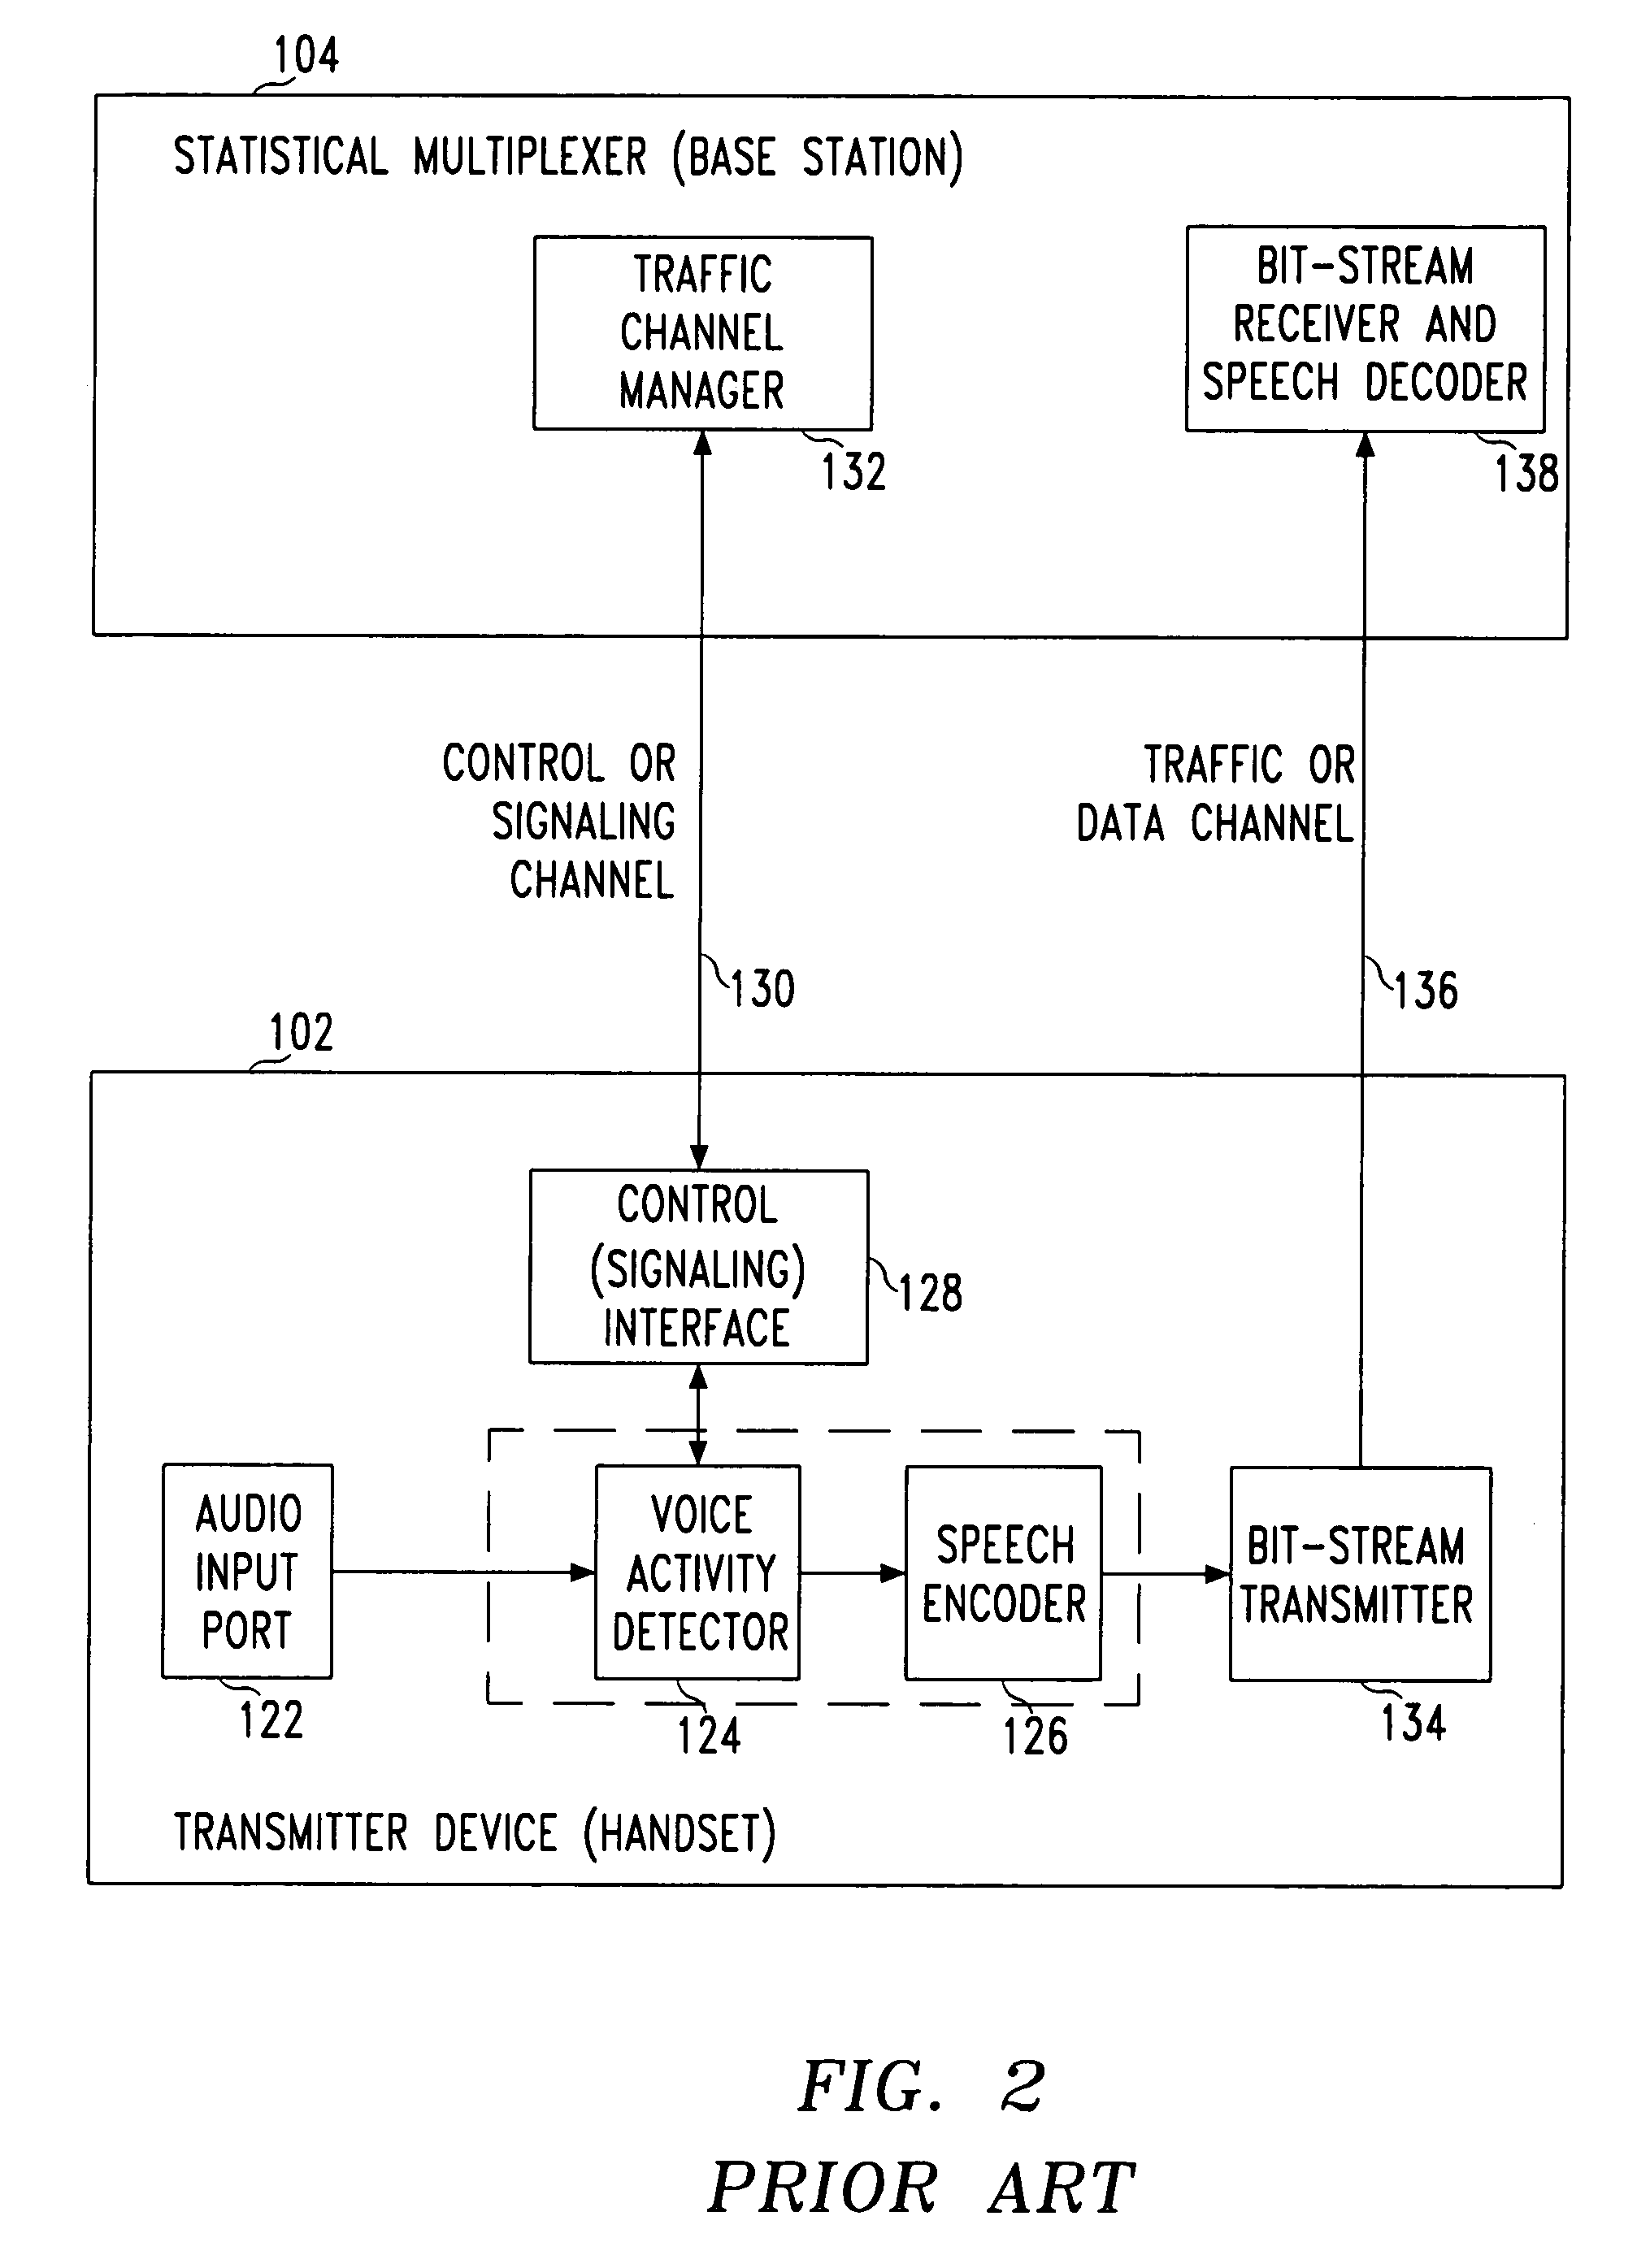 Method and apparatus for reducing access delay in discontinuous transmission packet telephony systems